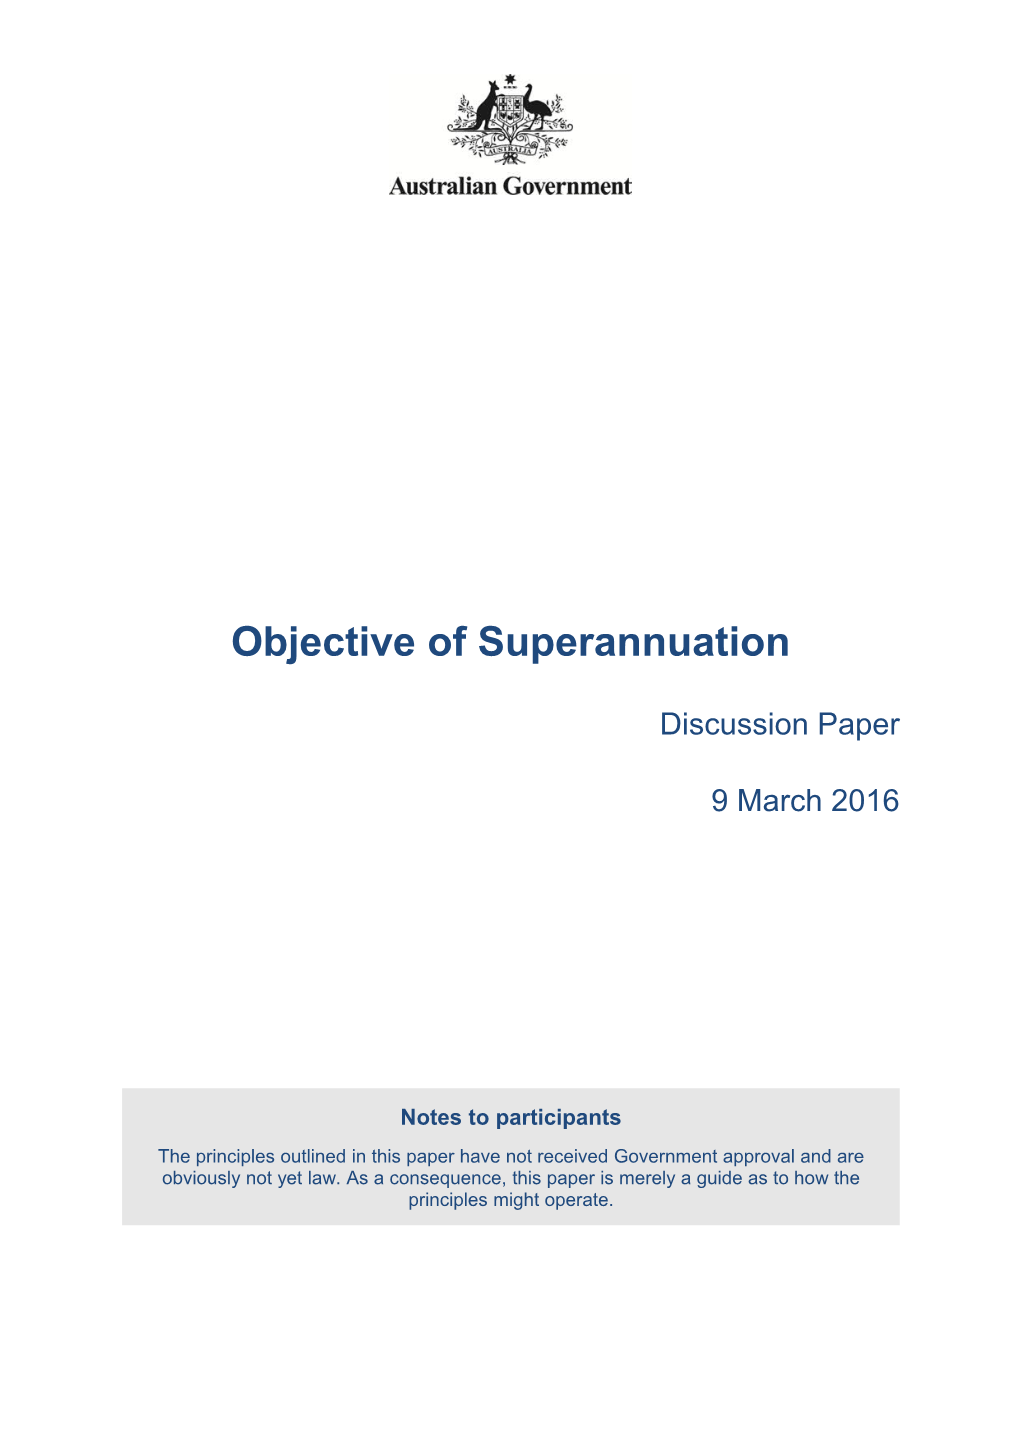 Objective of Superannuation - Discussion Paper